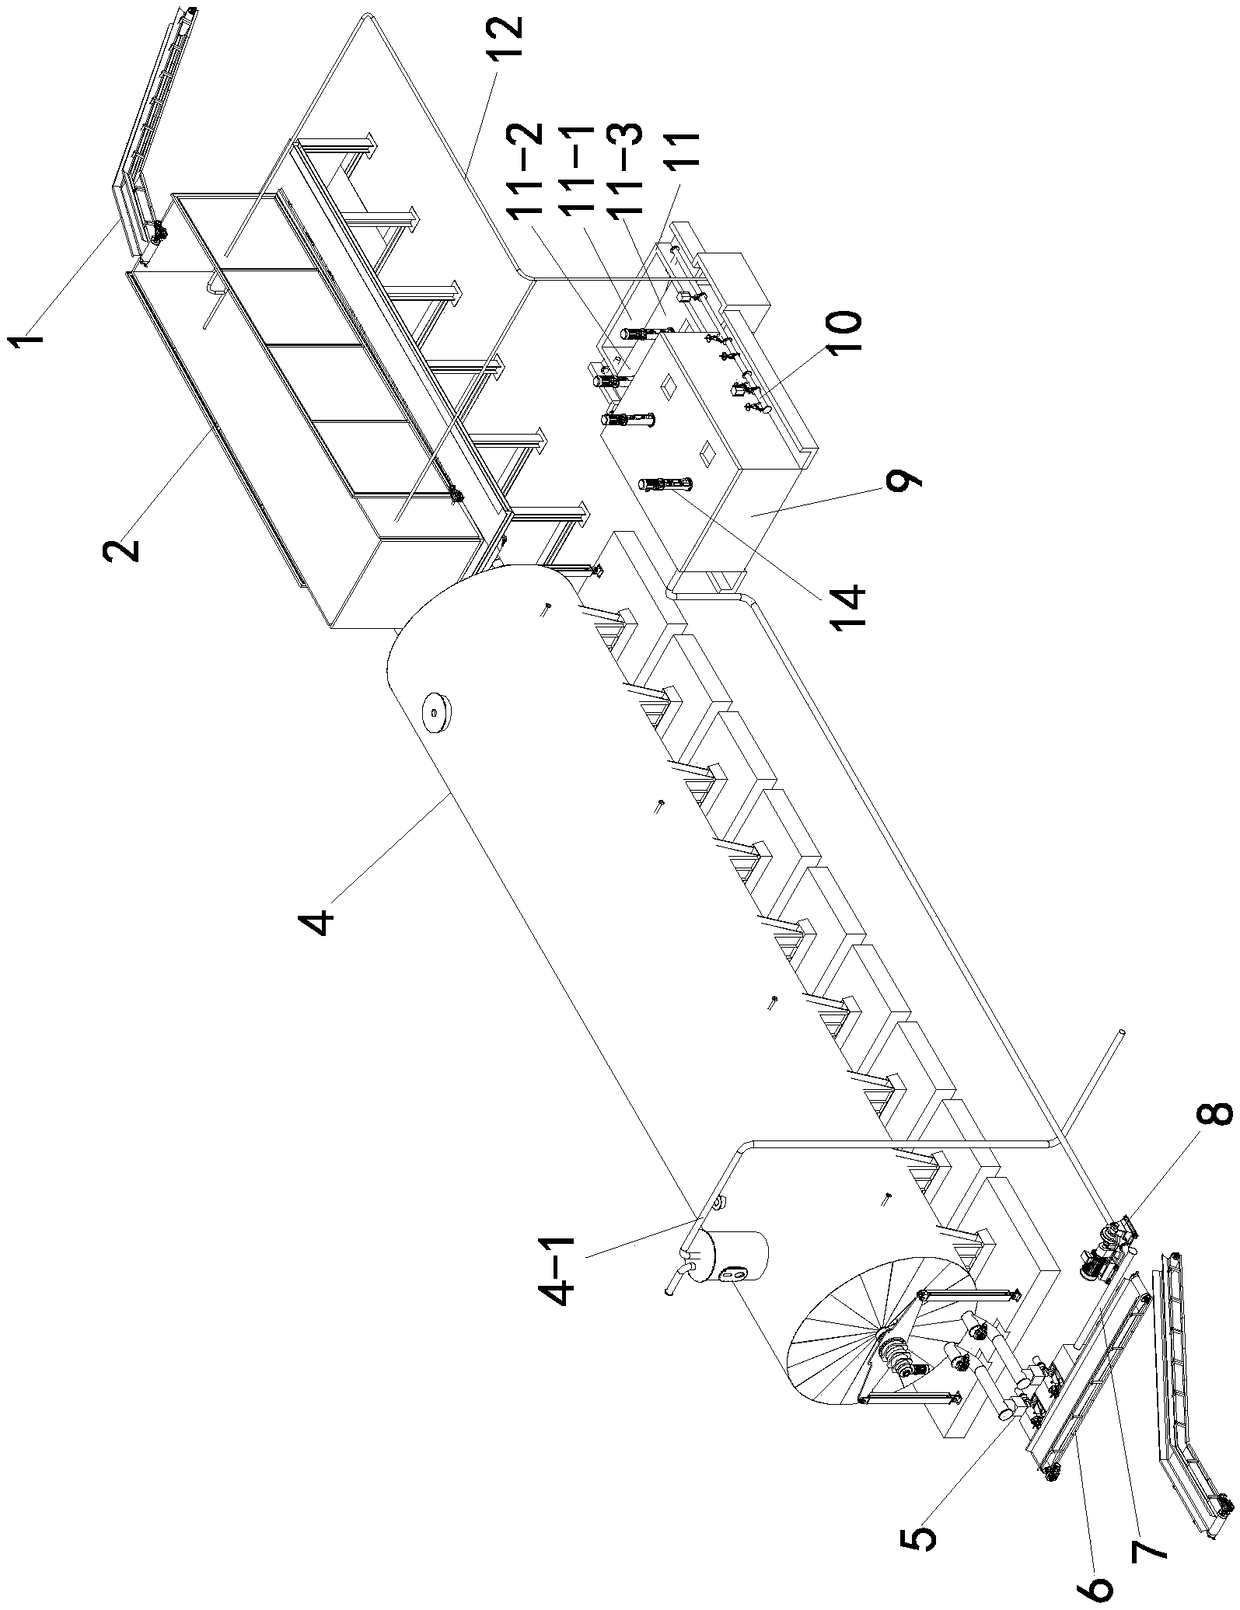 Horizontal push-flow anaerobic dry fermentation device and process for organic waste